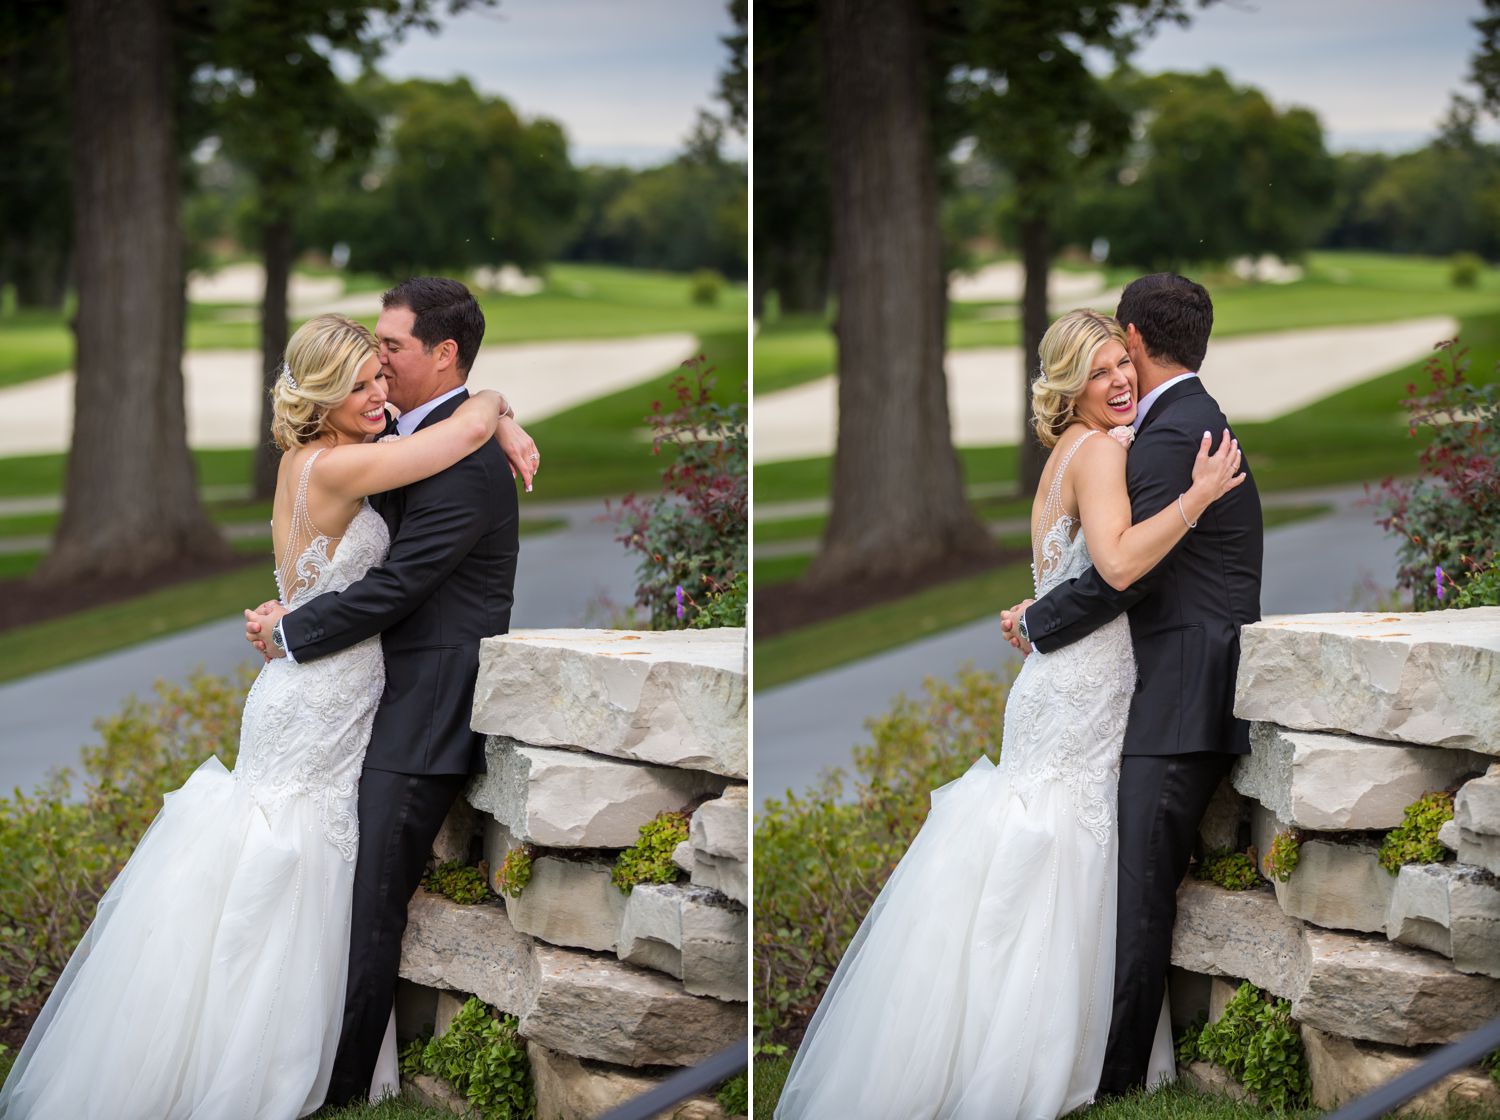 Chrissy and Joe - A Butterfield Country Club Wedding 51